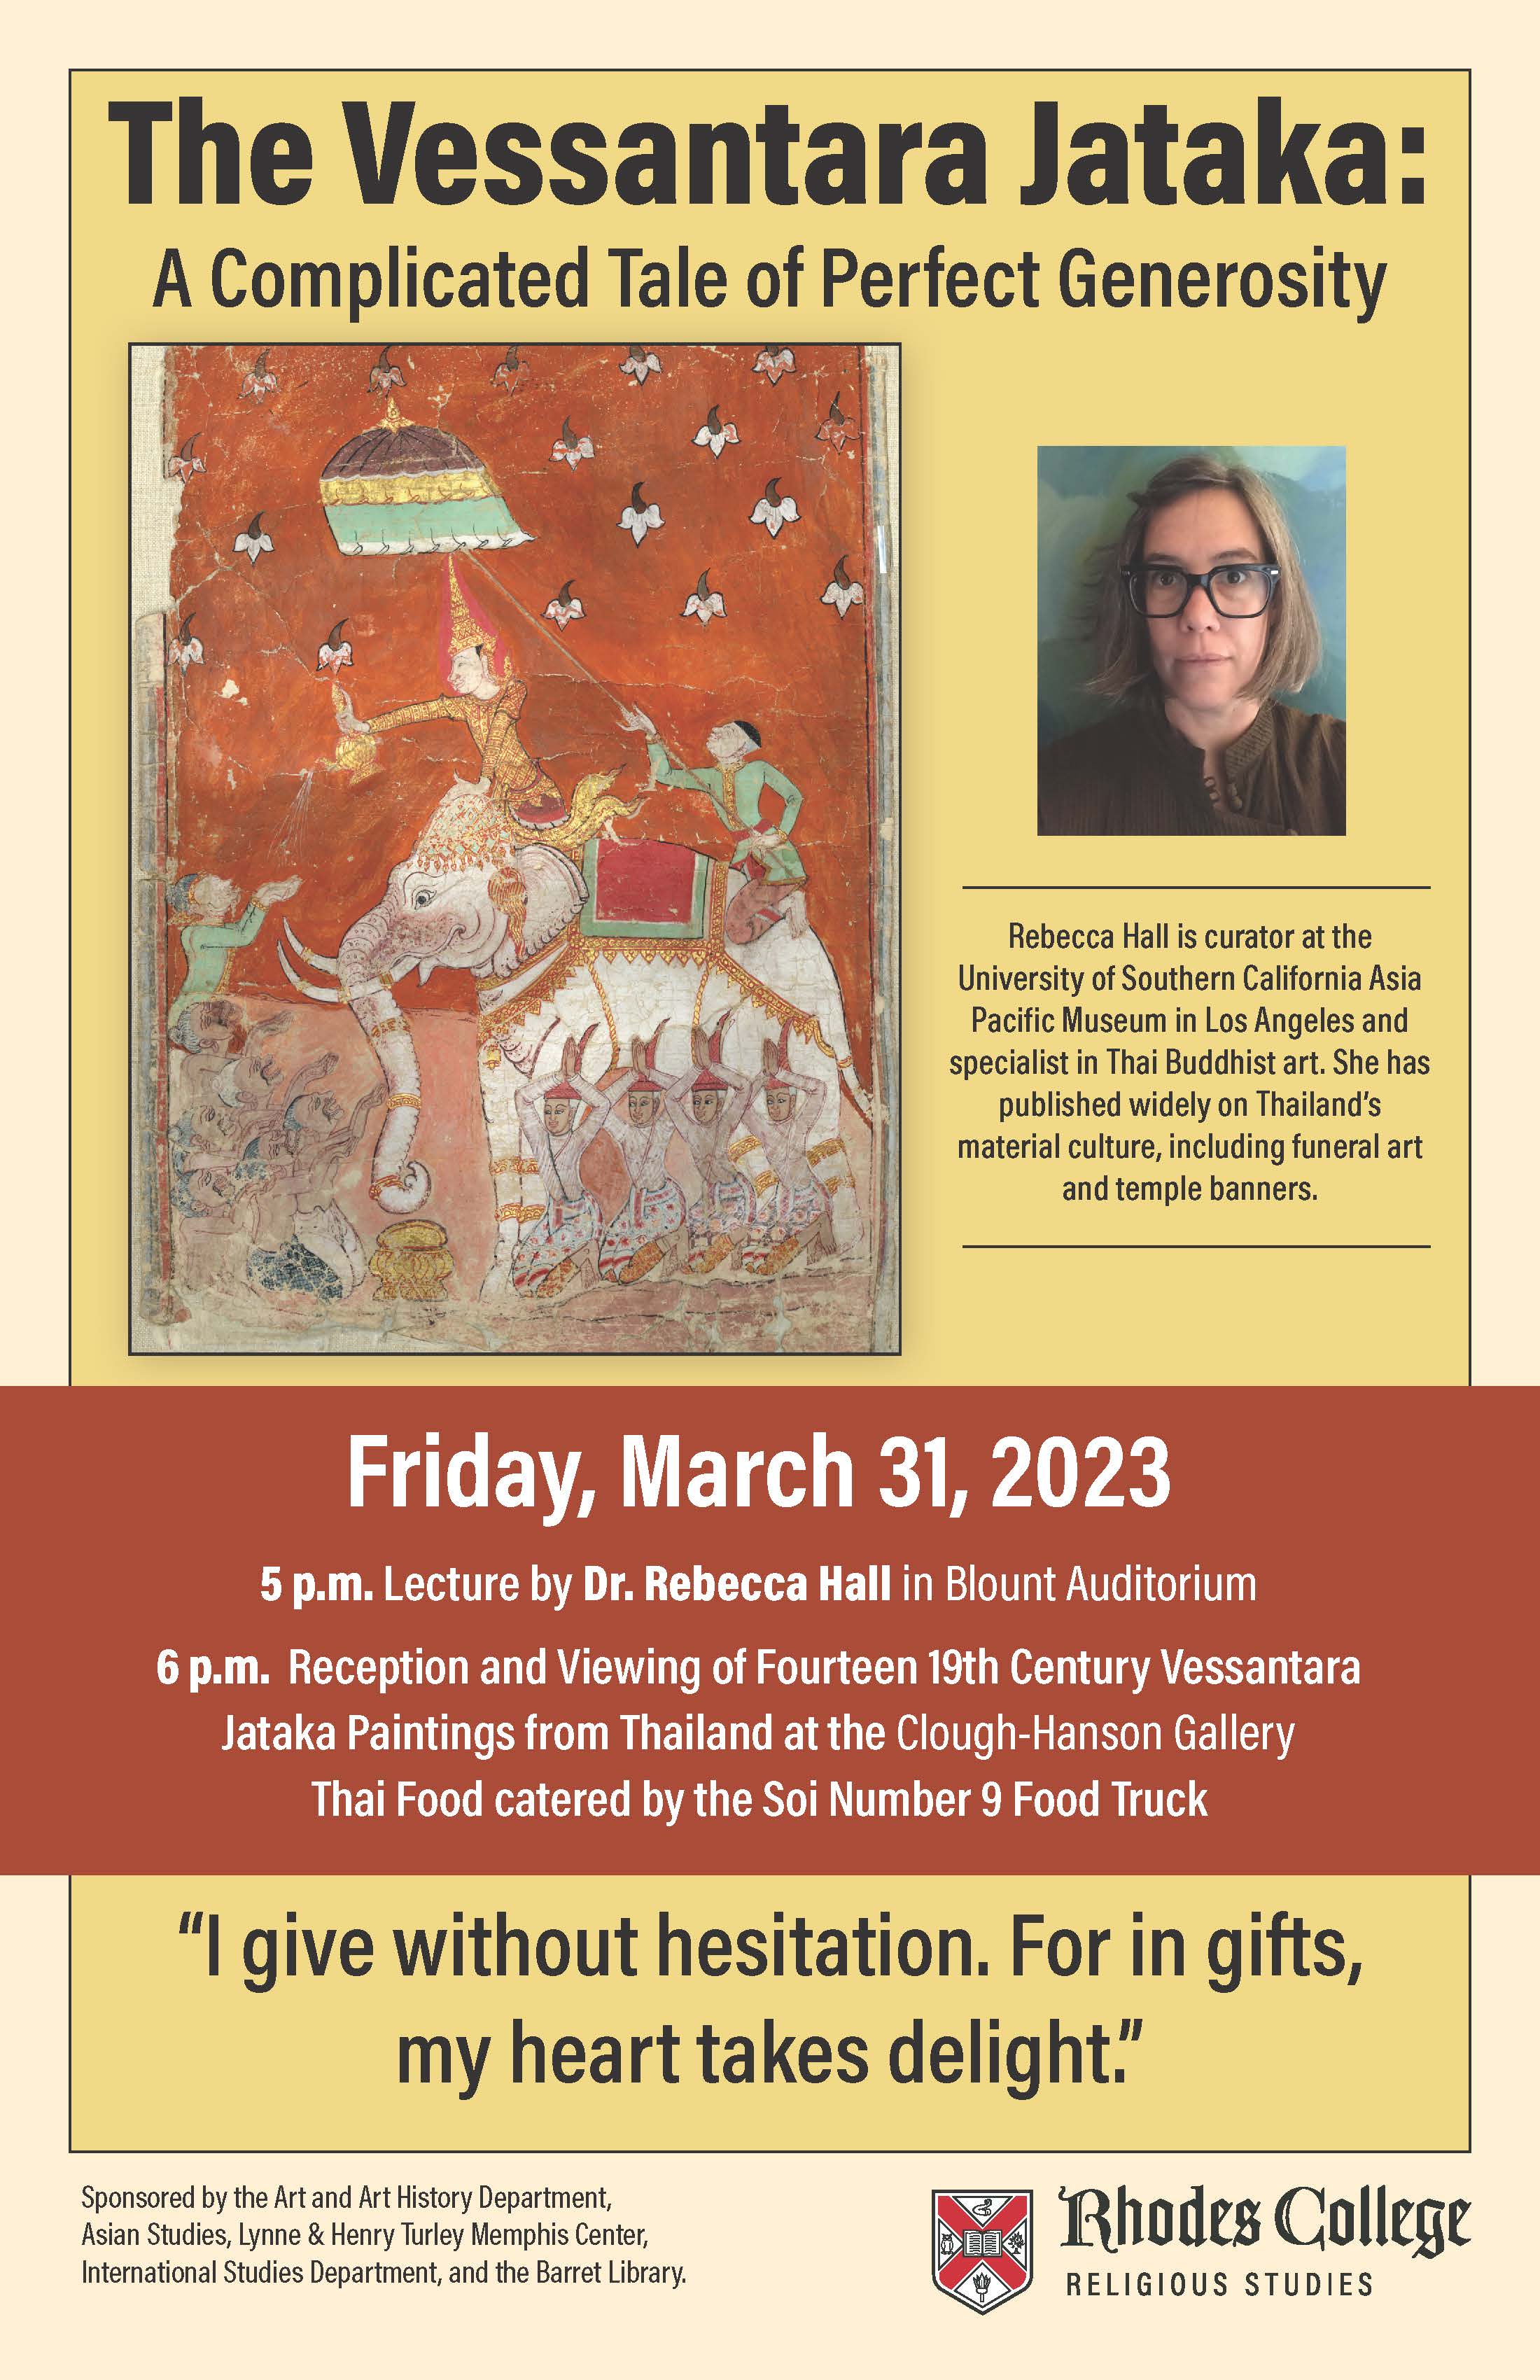 Lecture by Dr. Rebecca Hall on Friday, March 31 at 5pm 